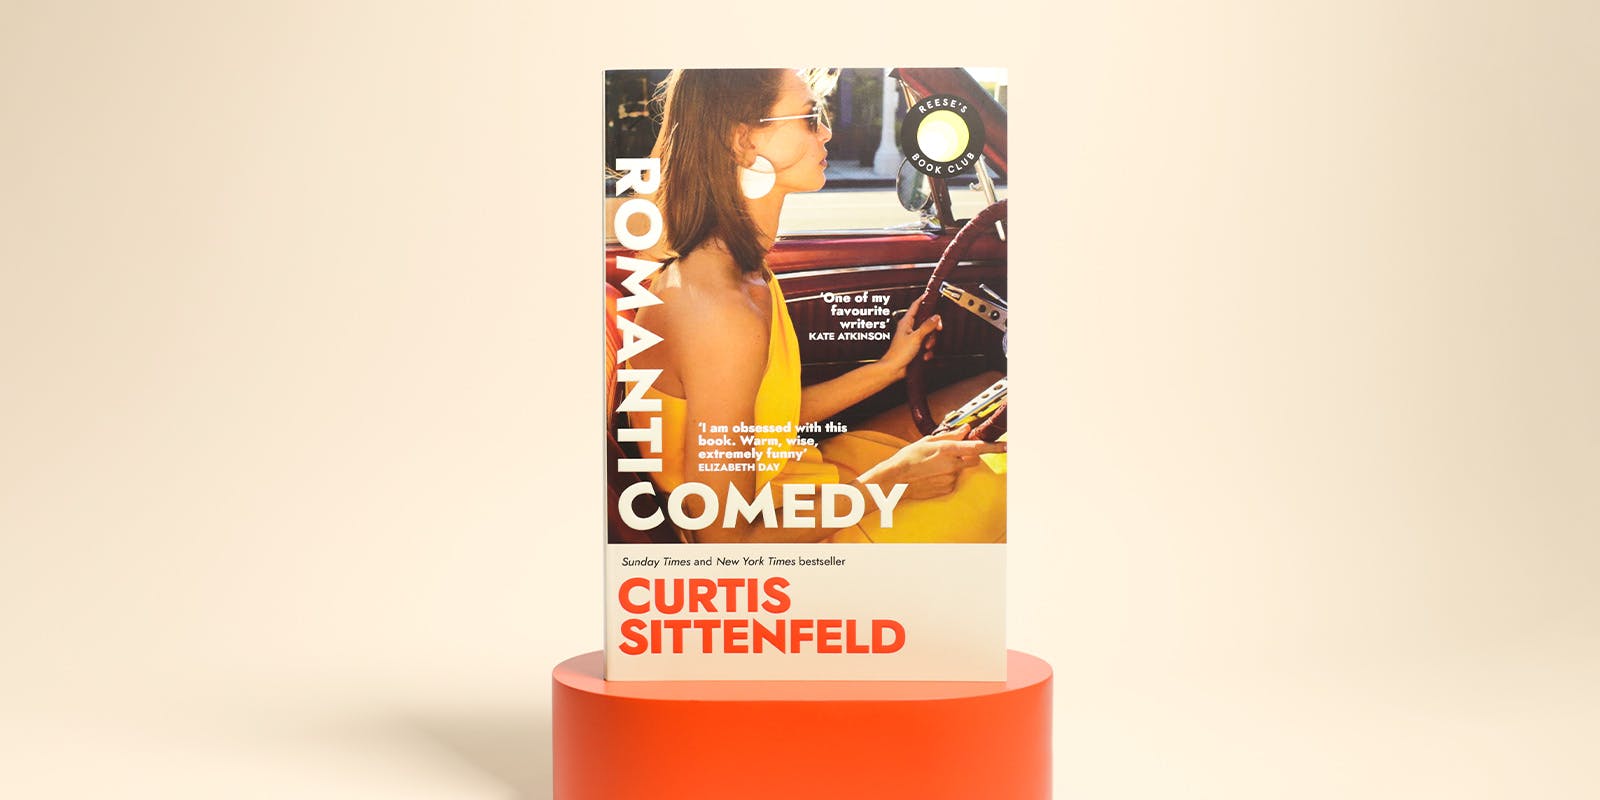 Curtis Sittenfeld's message to readers